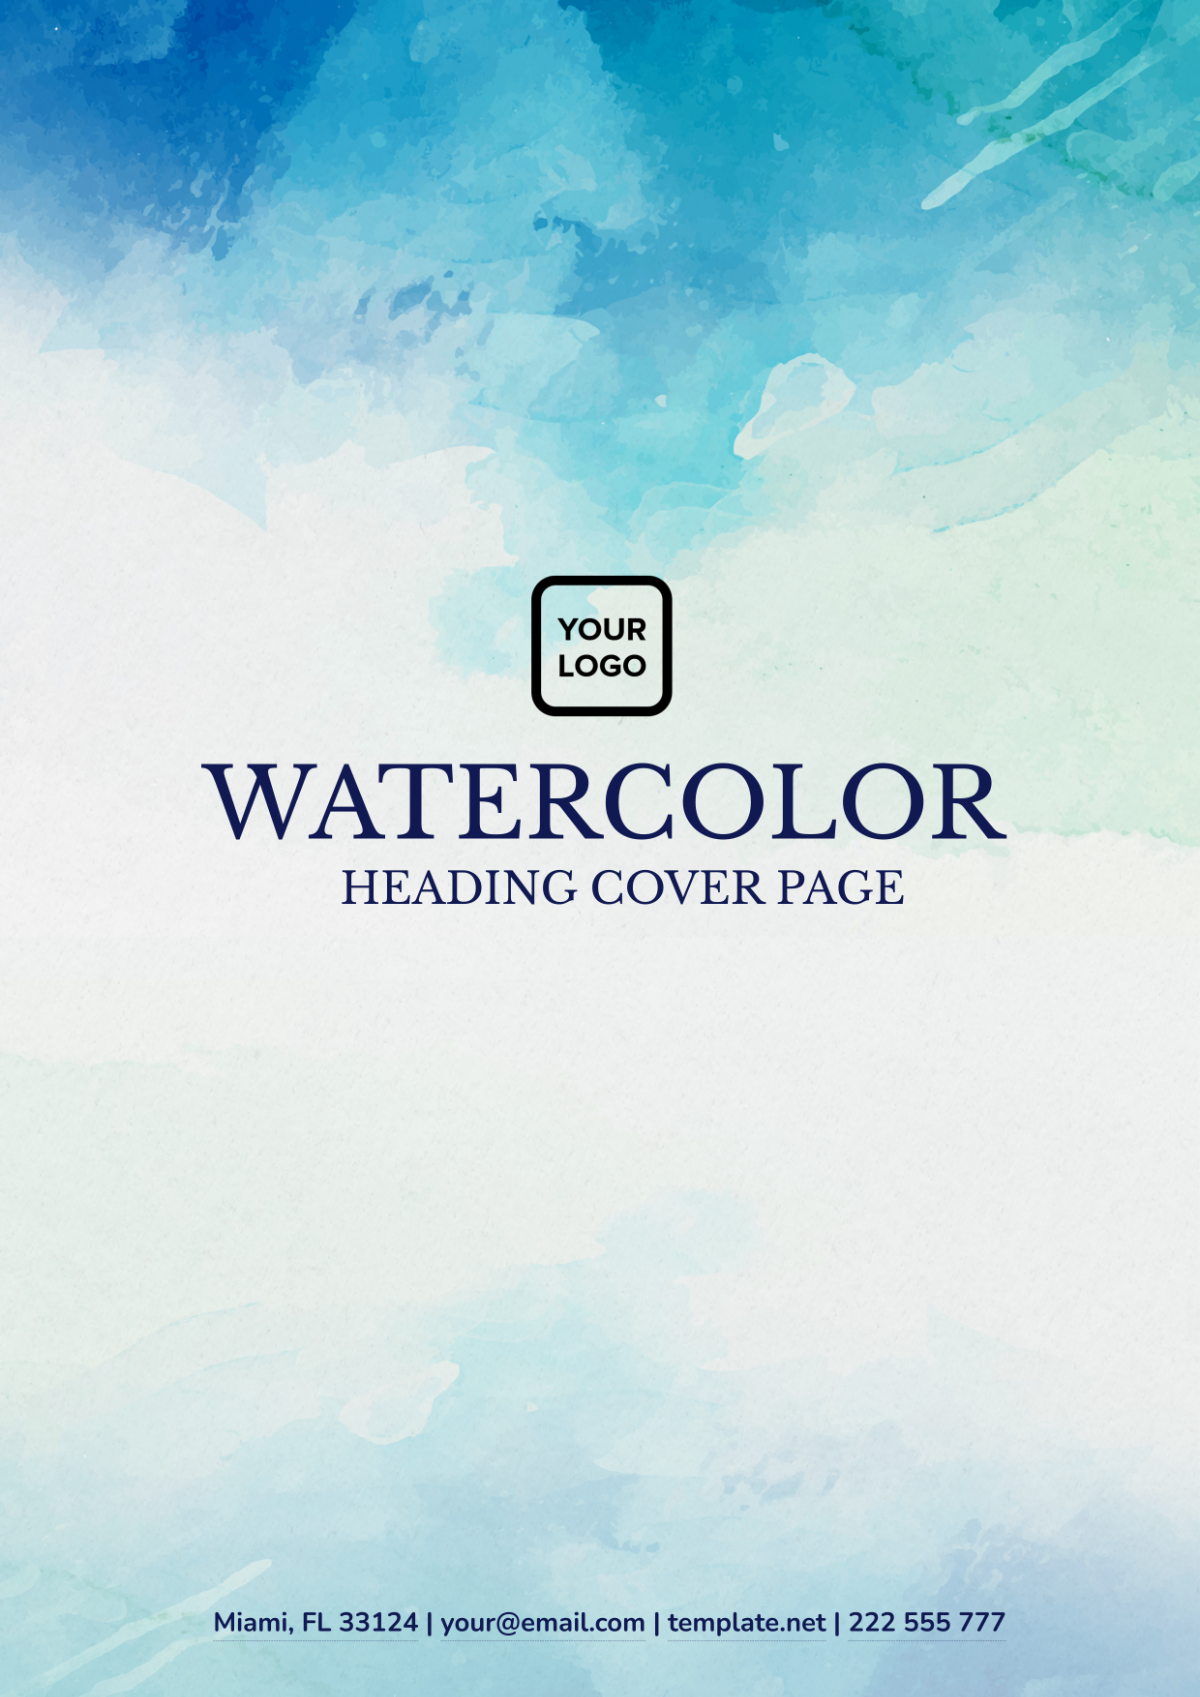 Watercolor Heading Cover Page Template